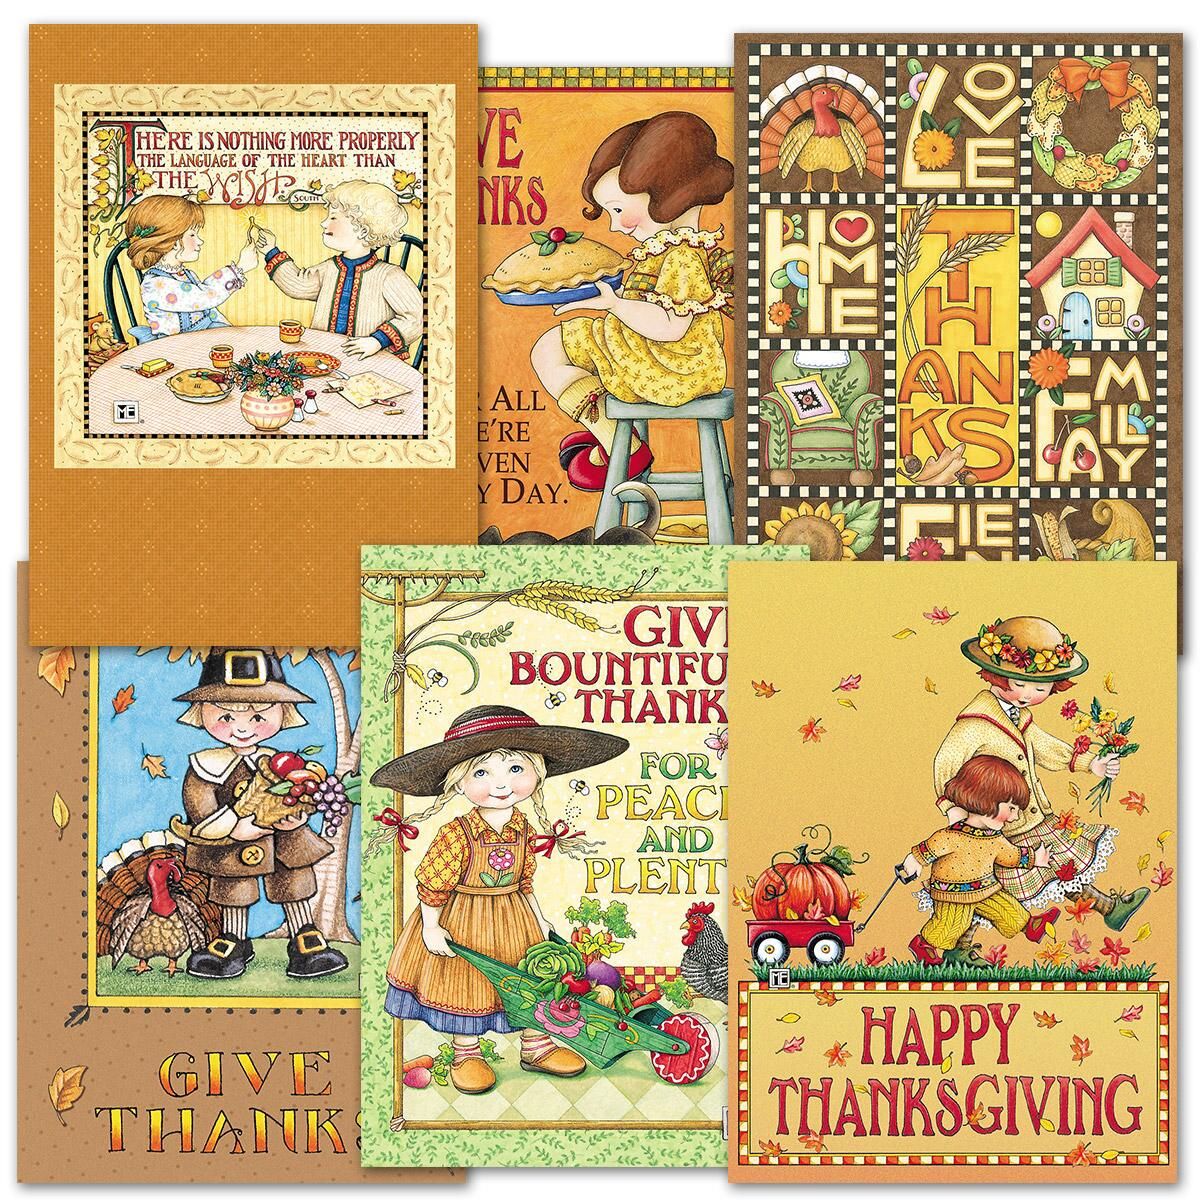 Mary Engelbreit¬Æ Thanksgiving Greeting Cards of 12 (6 designs), 5 x 7 cards, and come with white envelopes